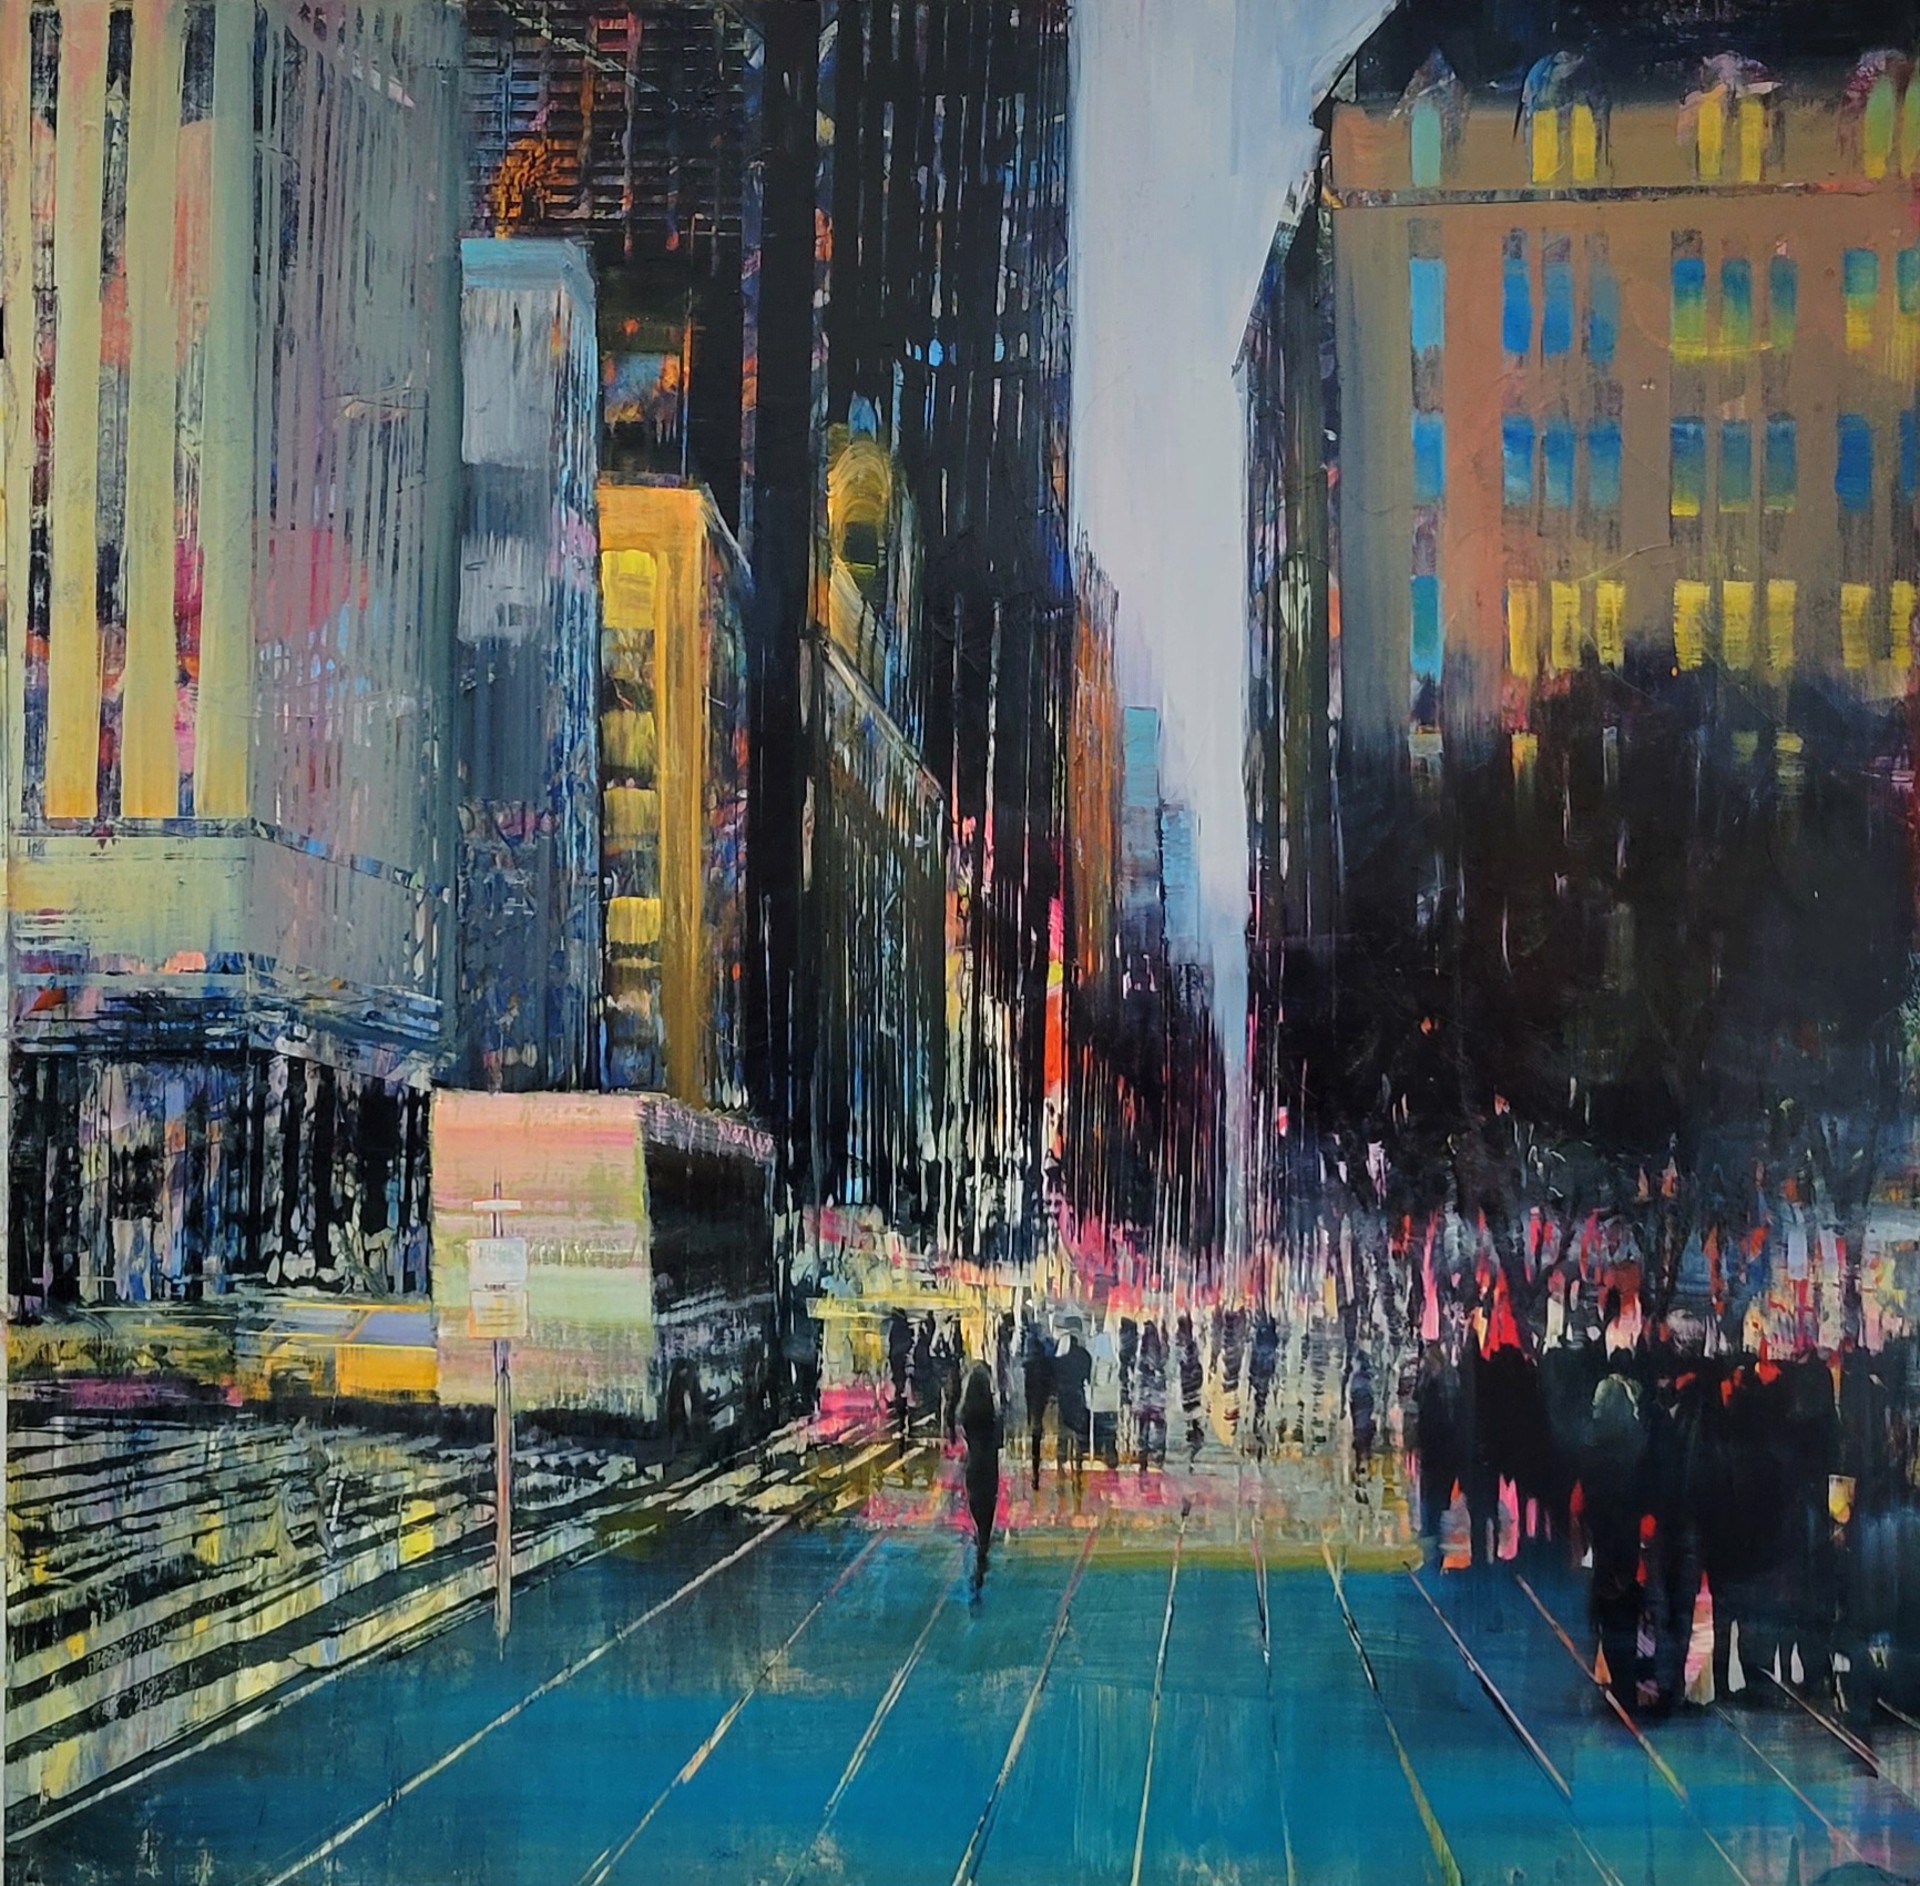 Nocturne on 5th by David Dunlop